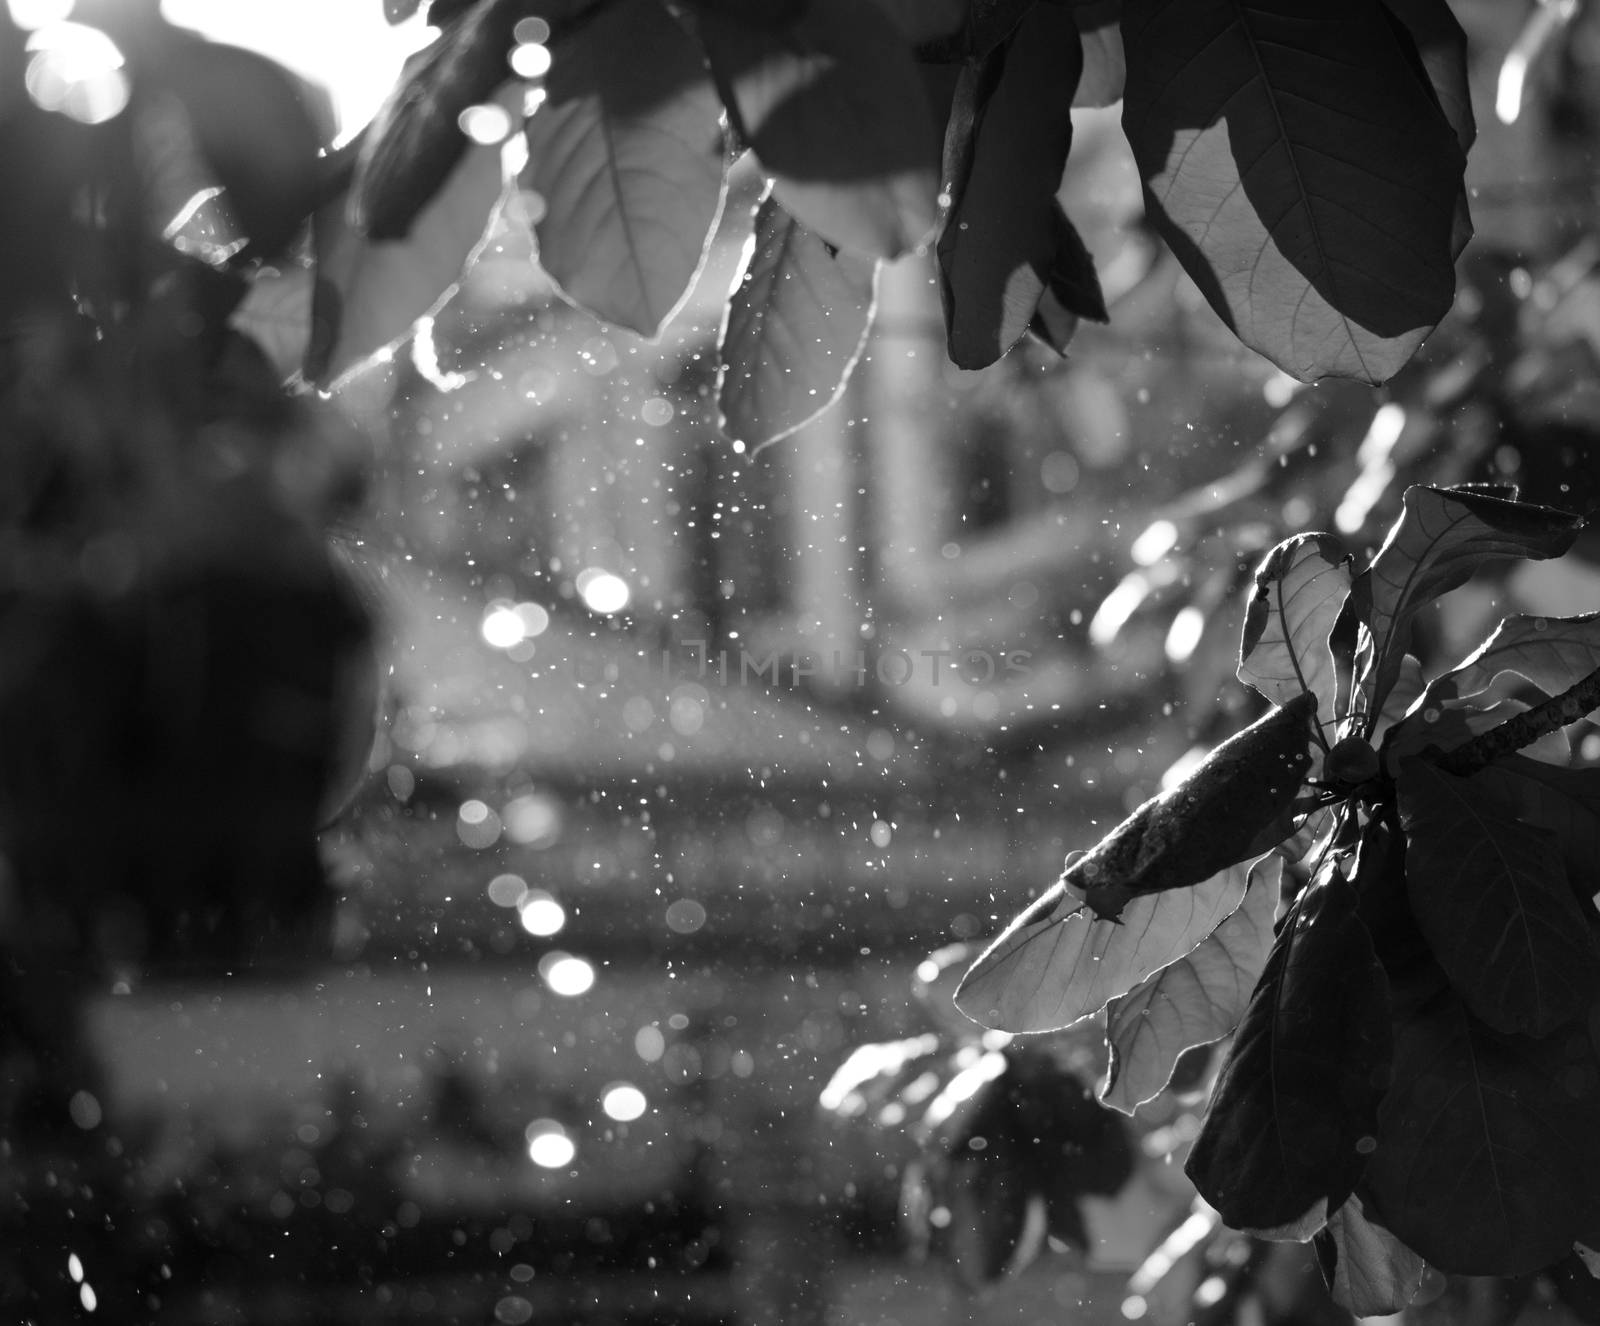 BLACK AND WHITE PHOTO OF CLOSE-UP OF RAINDROPS AND BLURRY LEAVES